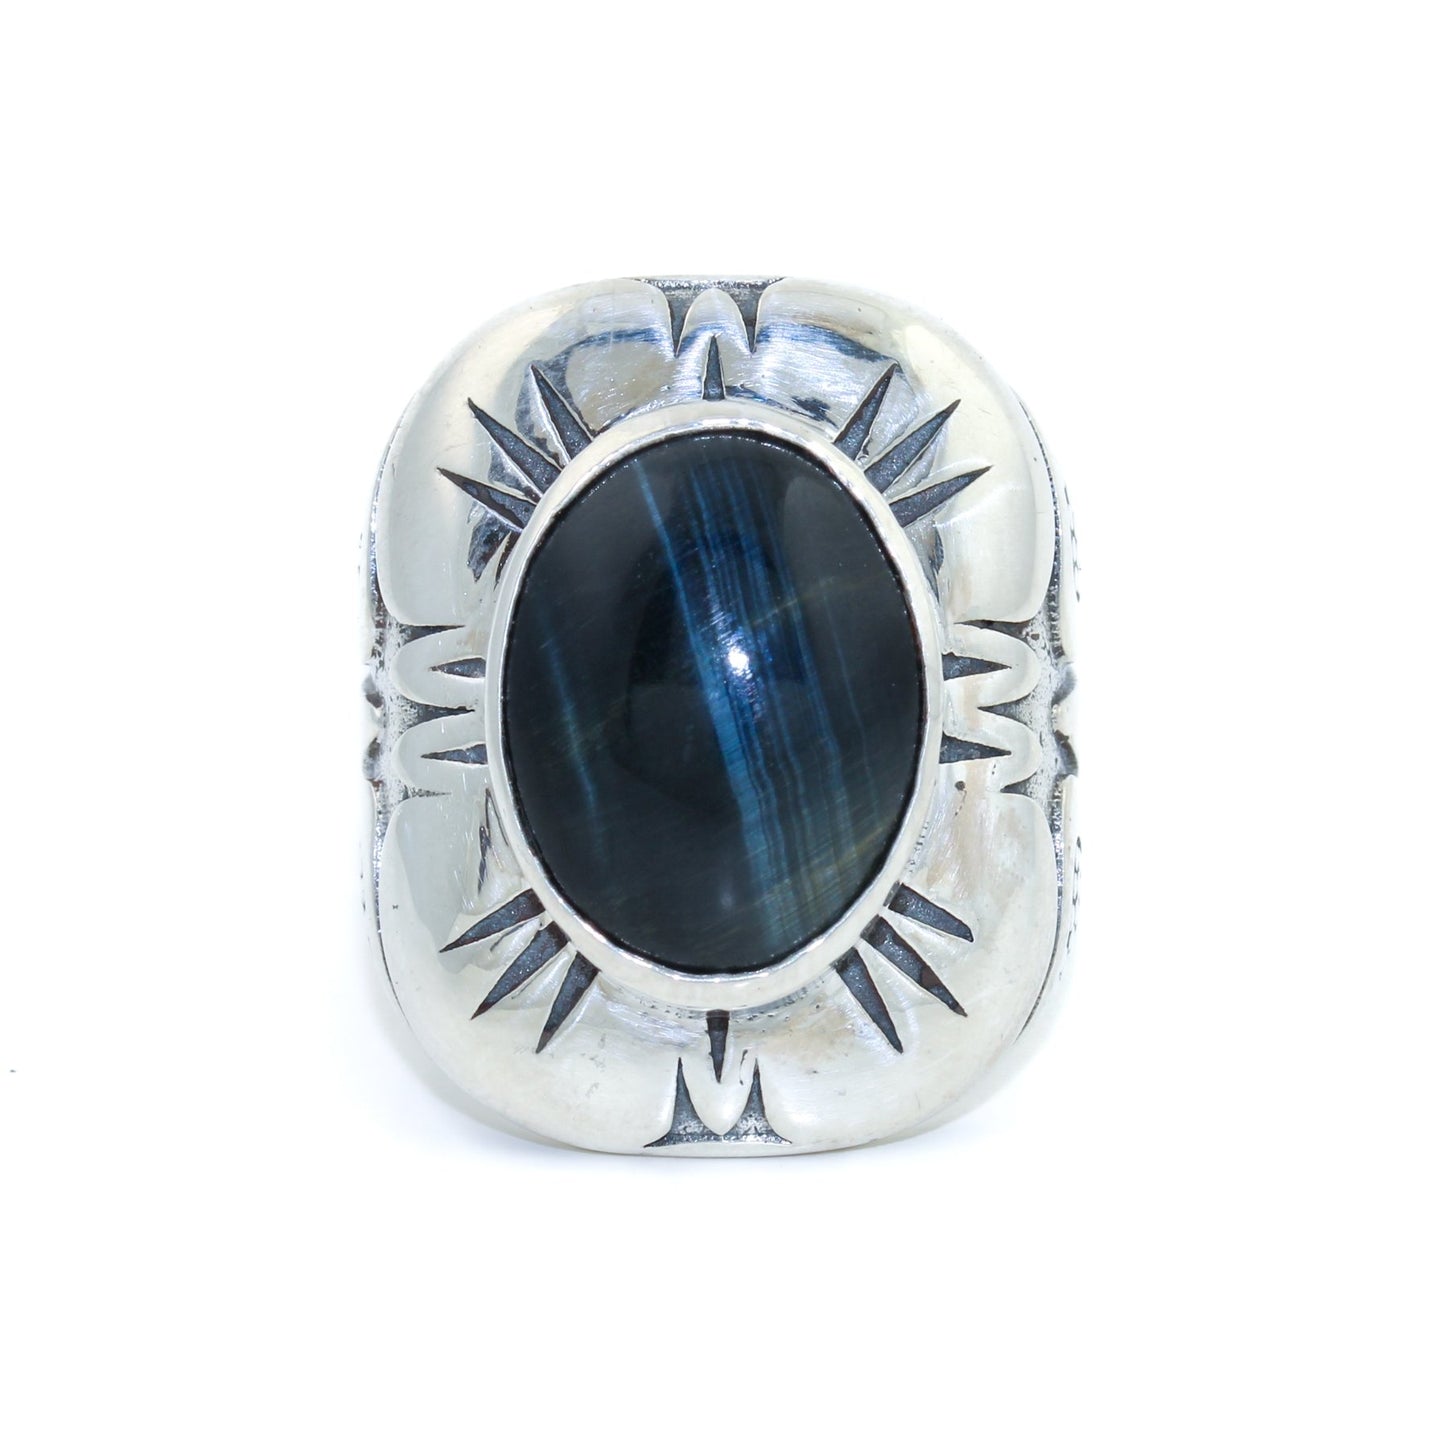 Remarkable "Grand Hoa" Ring x Blue Tiger's Eye by Kingdom - Kingdom Jewelry